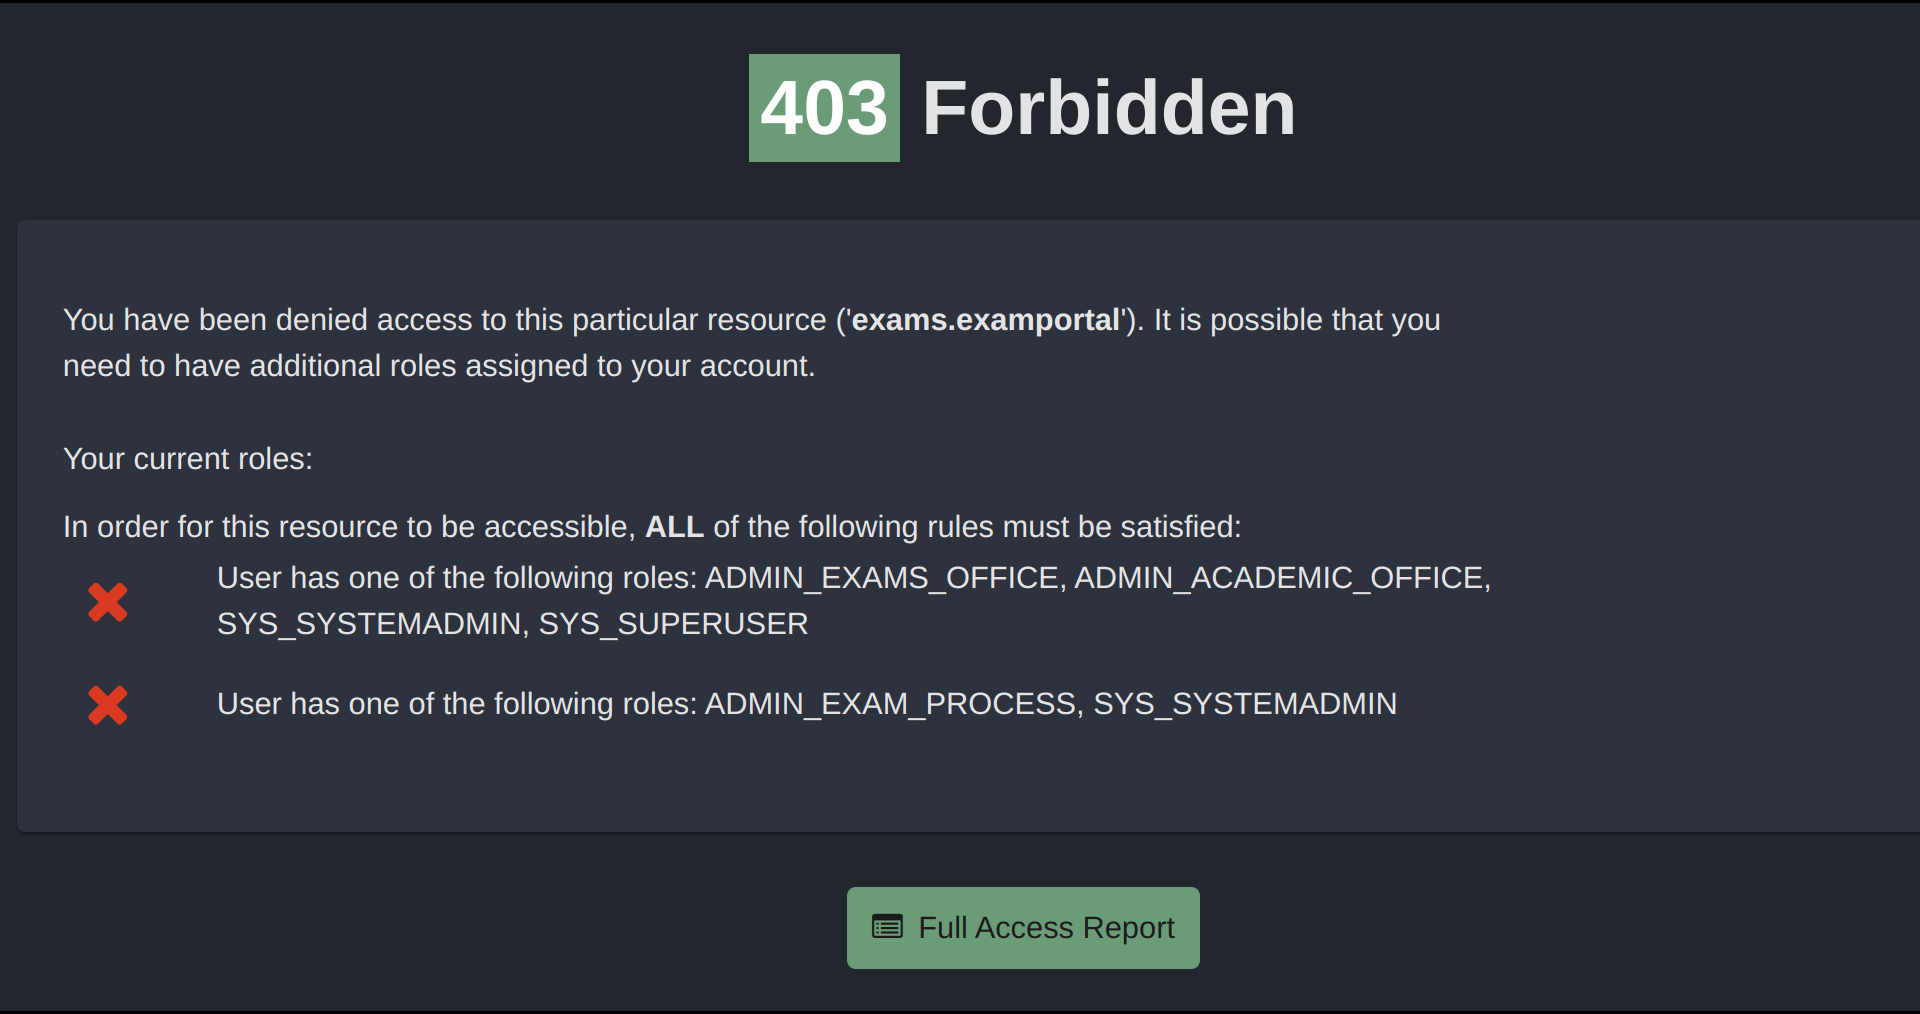 Example Forbidden Page